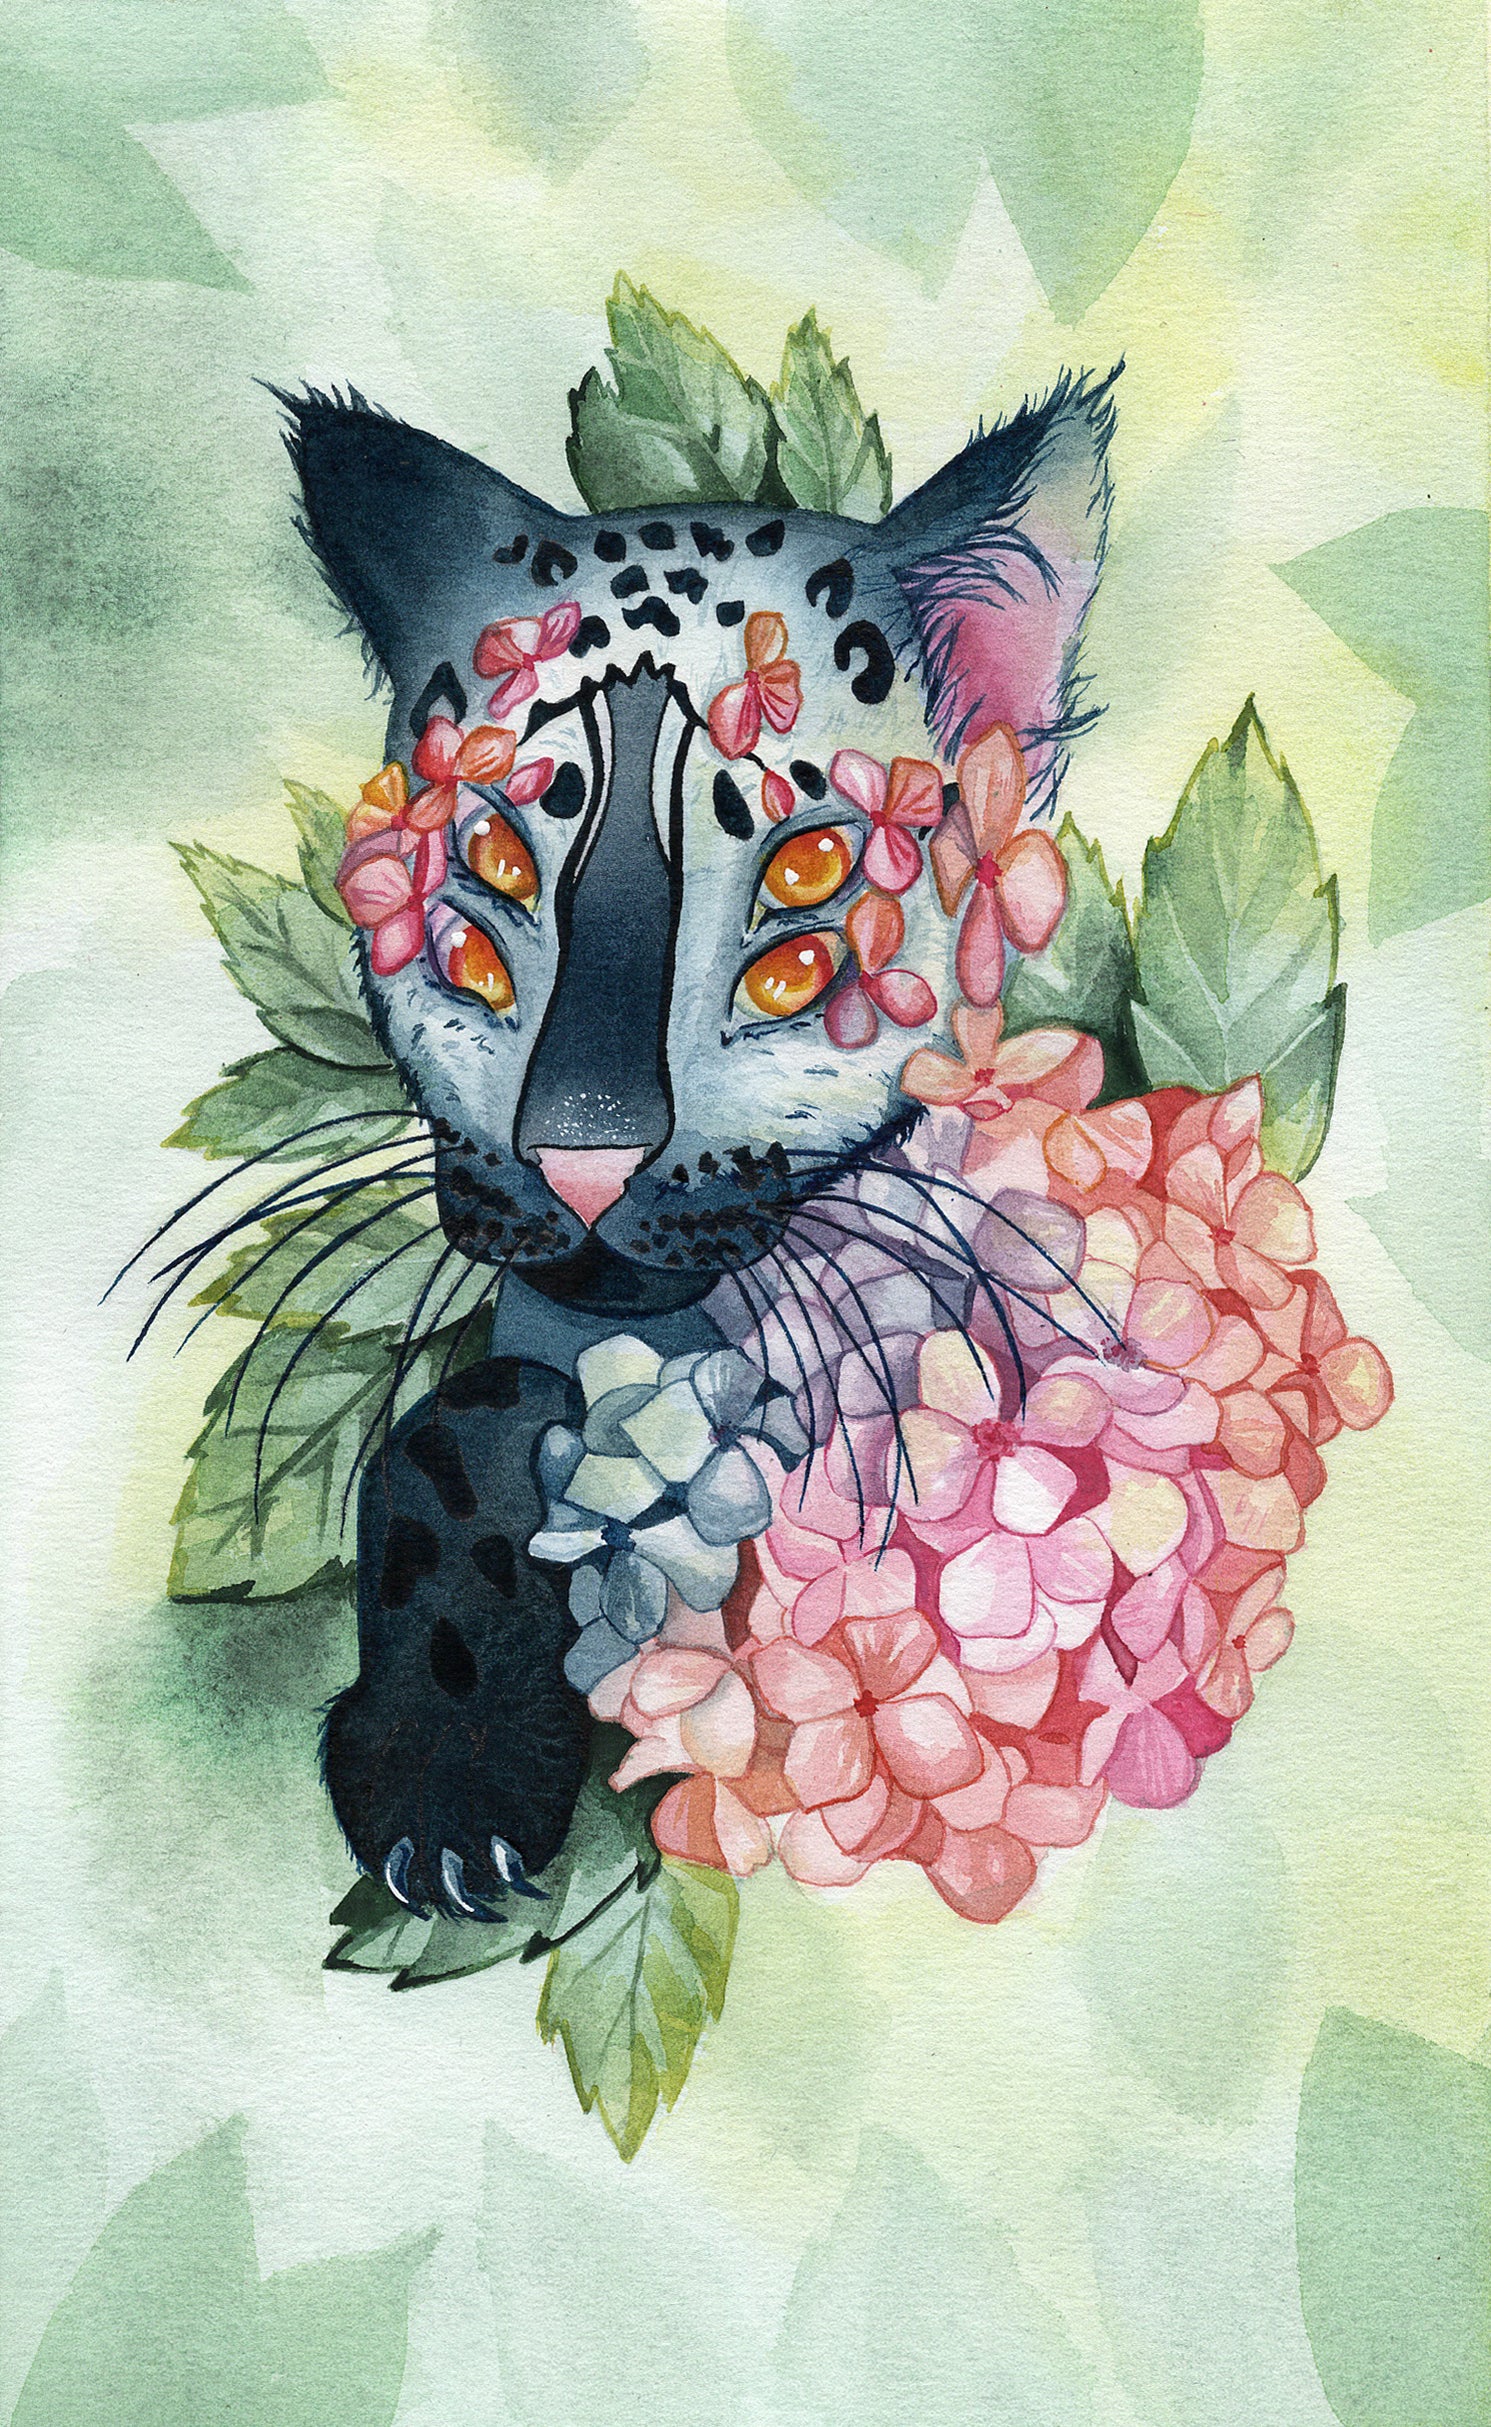 Watercolor painting of a four eyes cat with flowers growing from its face. The cat is inspired by a snow leopard and is surrounded by hydrangea flowers.